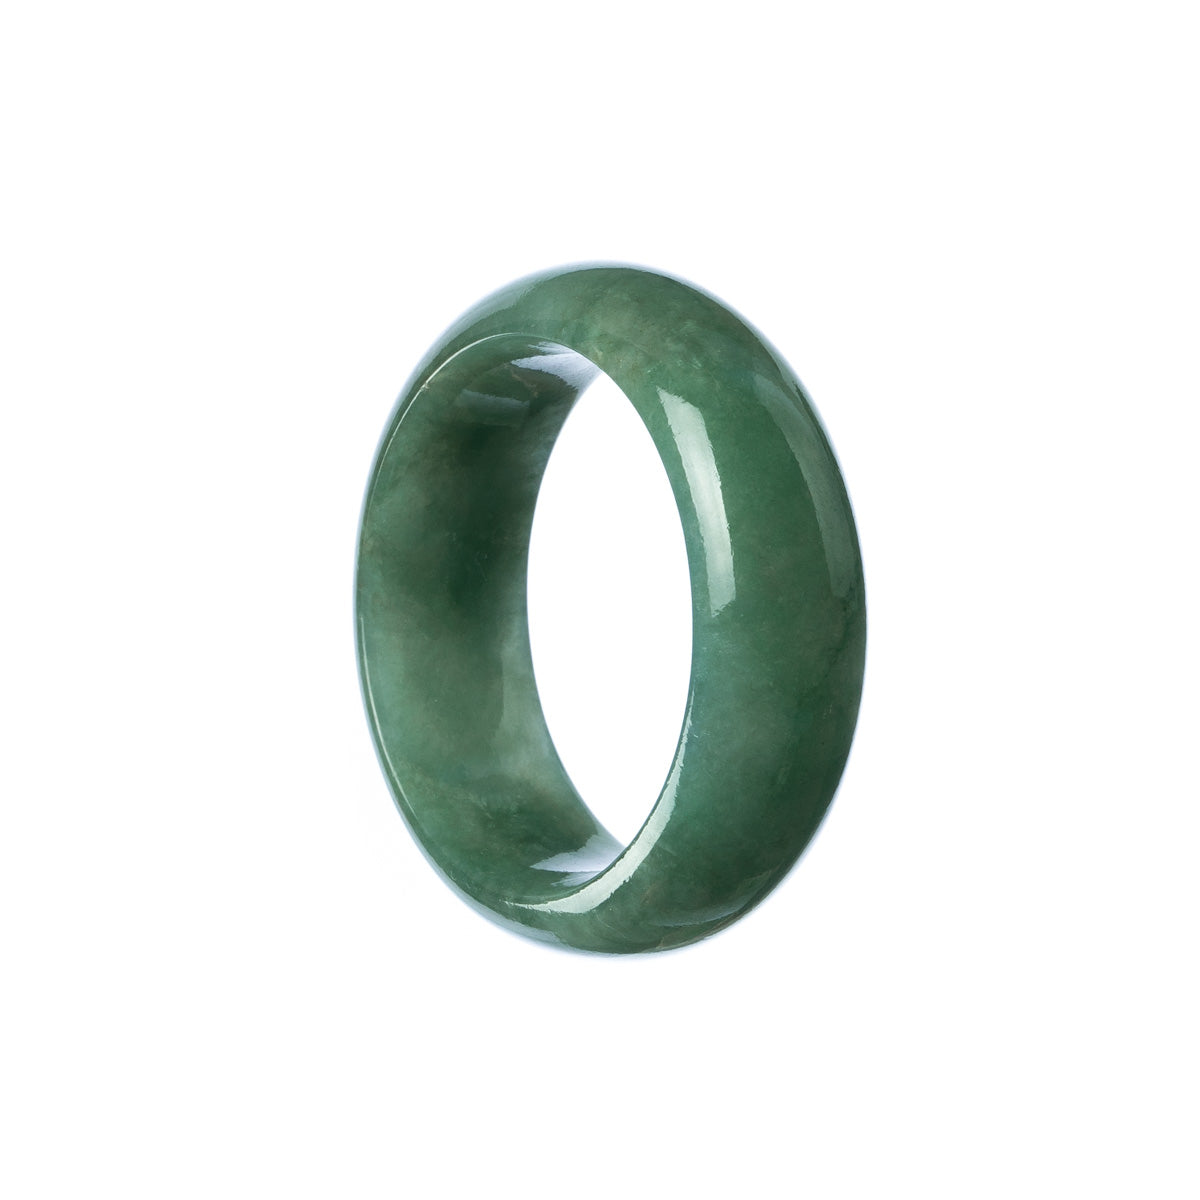 A half moon-shaped jade bracelet for children with an authentic and natural green color.